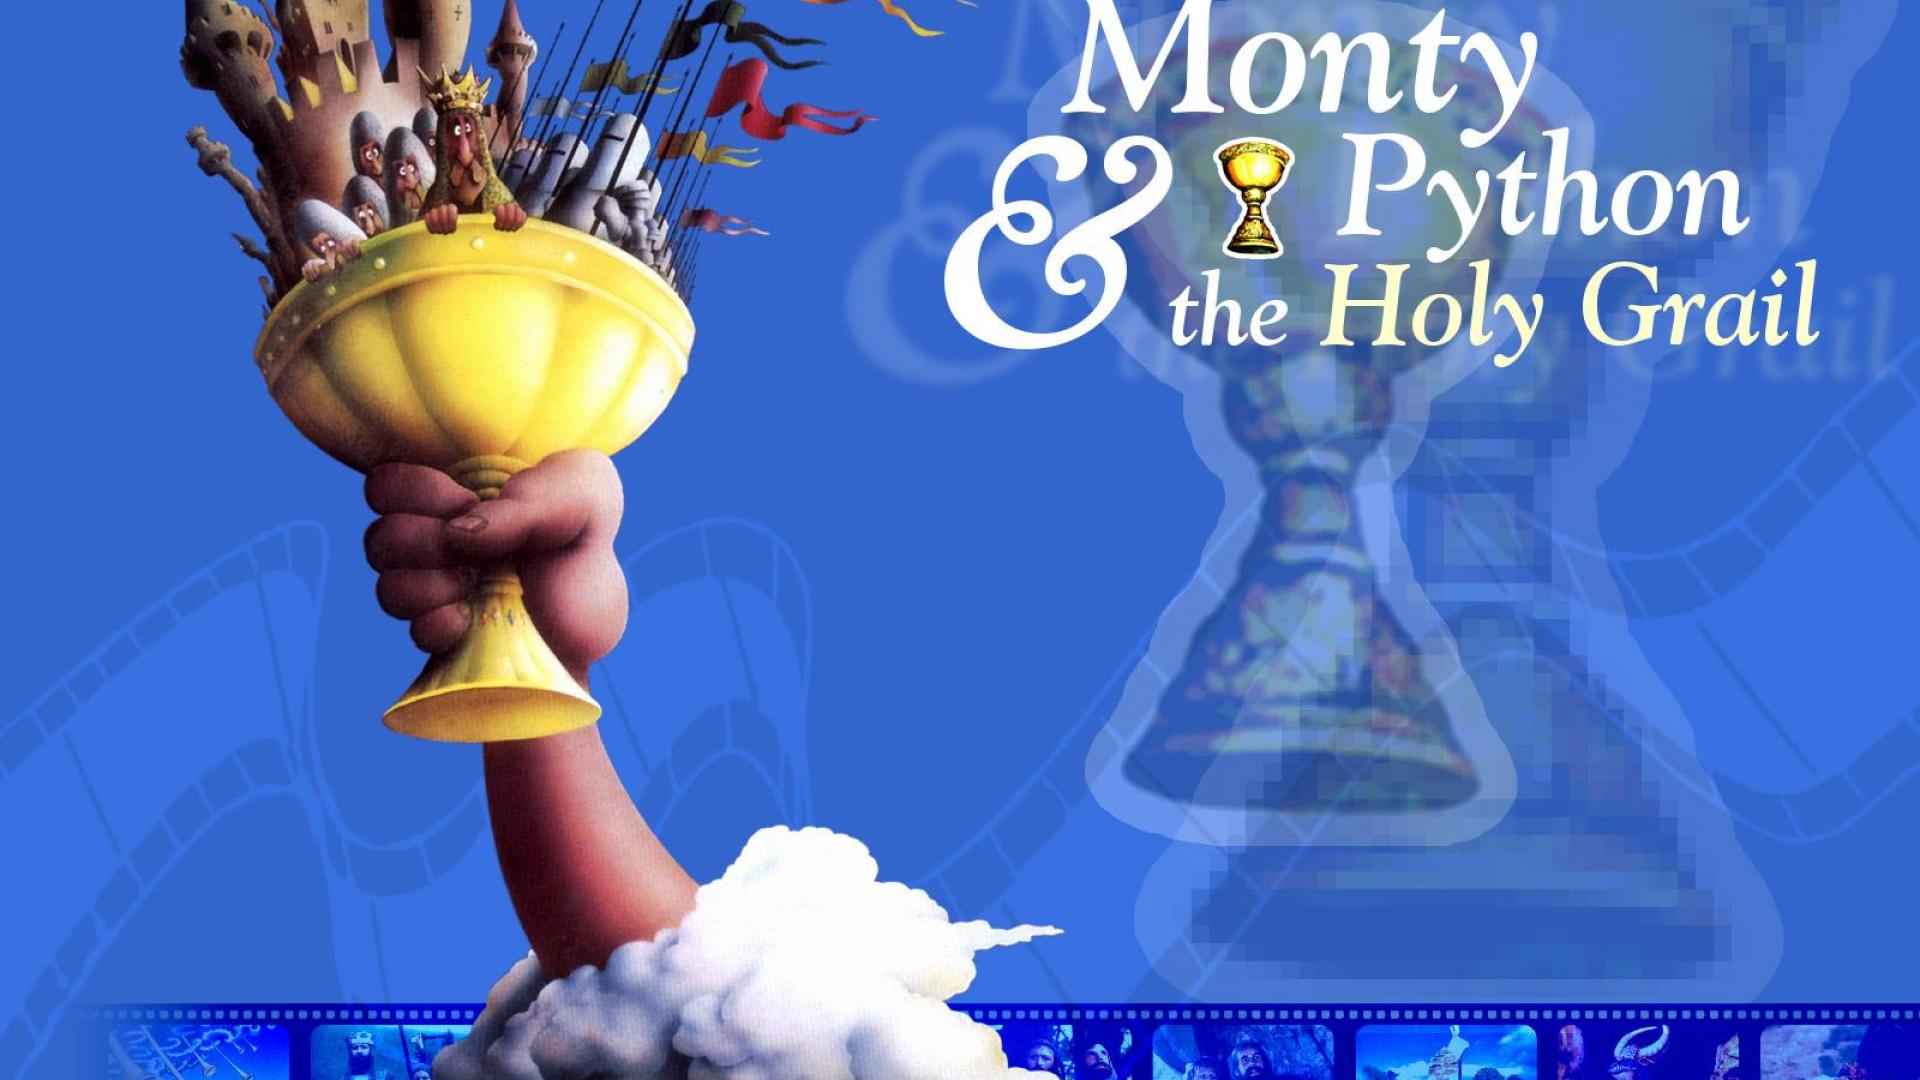 Monty python and the holy grail - - High Quality and other